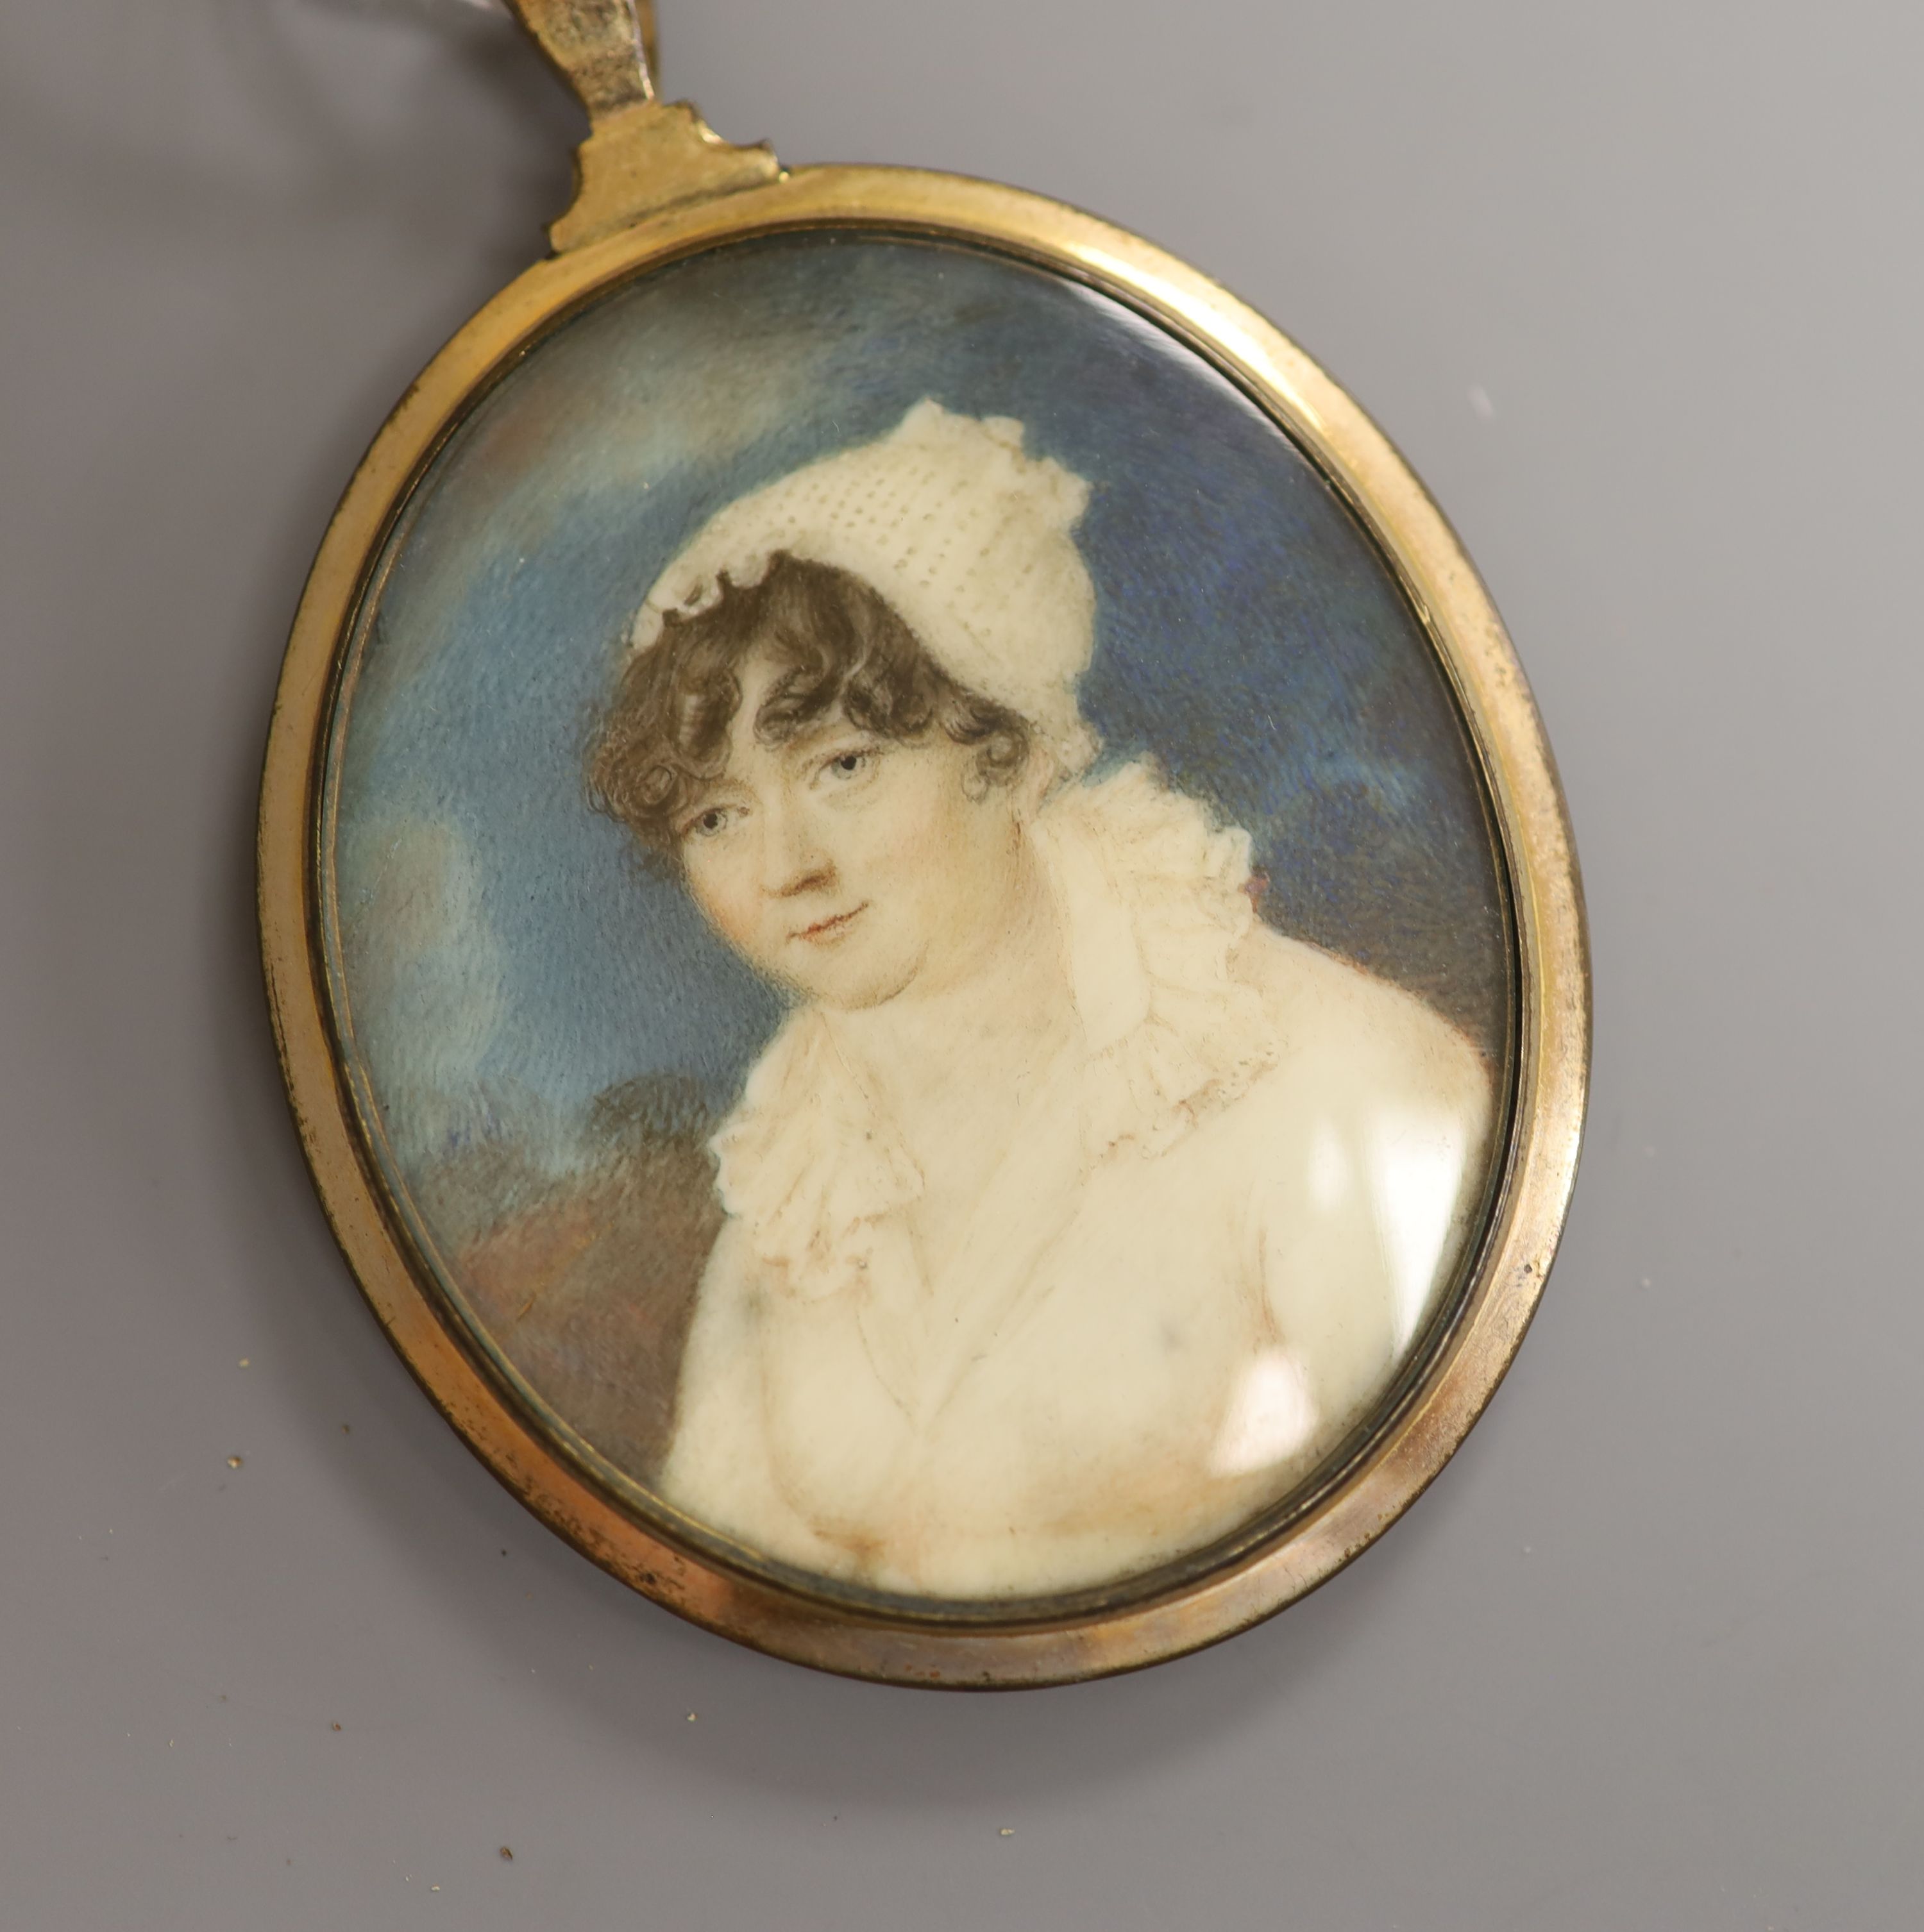 A 19th century French oval portrait miniature on ivory, framed, 6 x 5cm